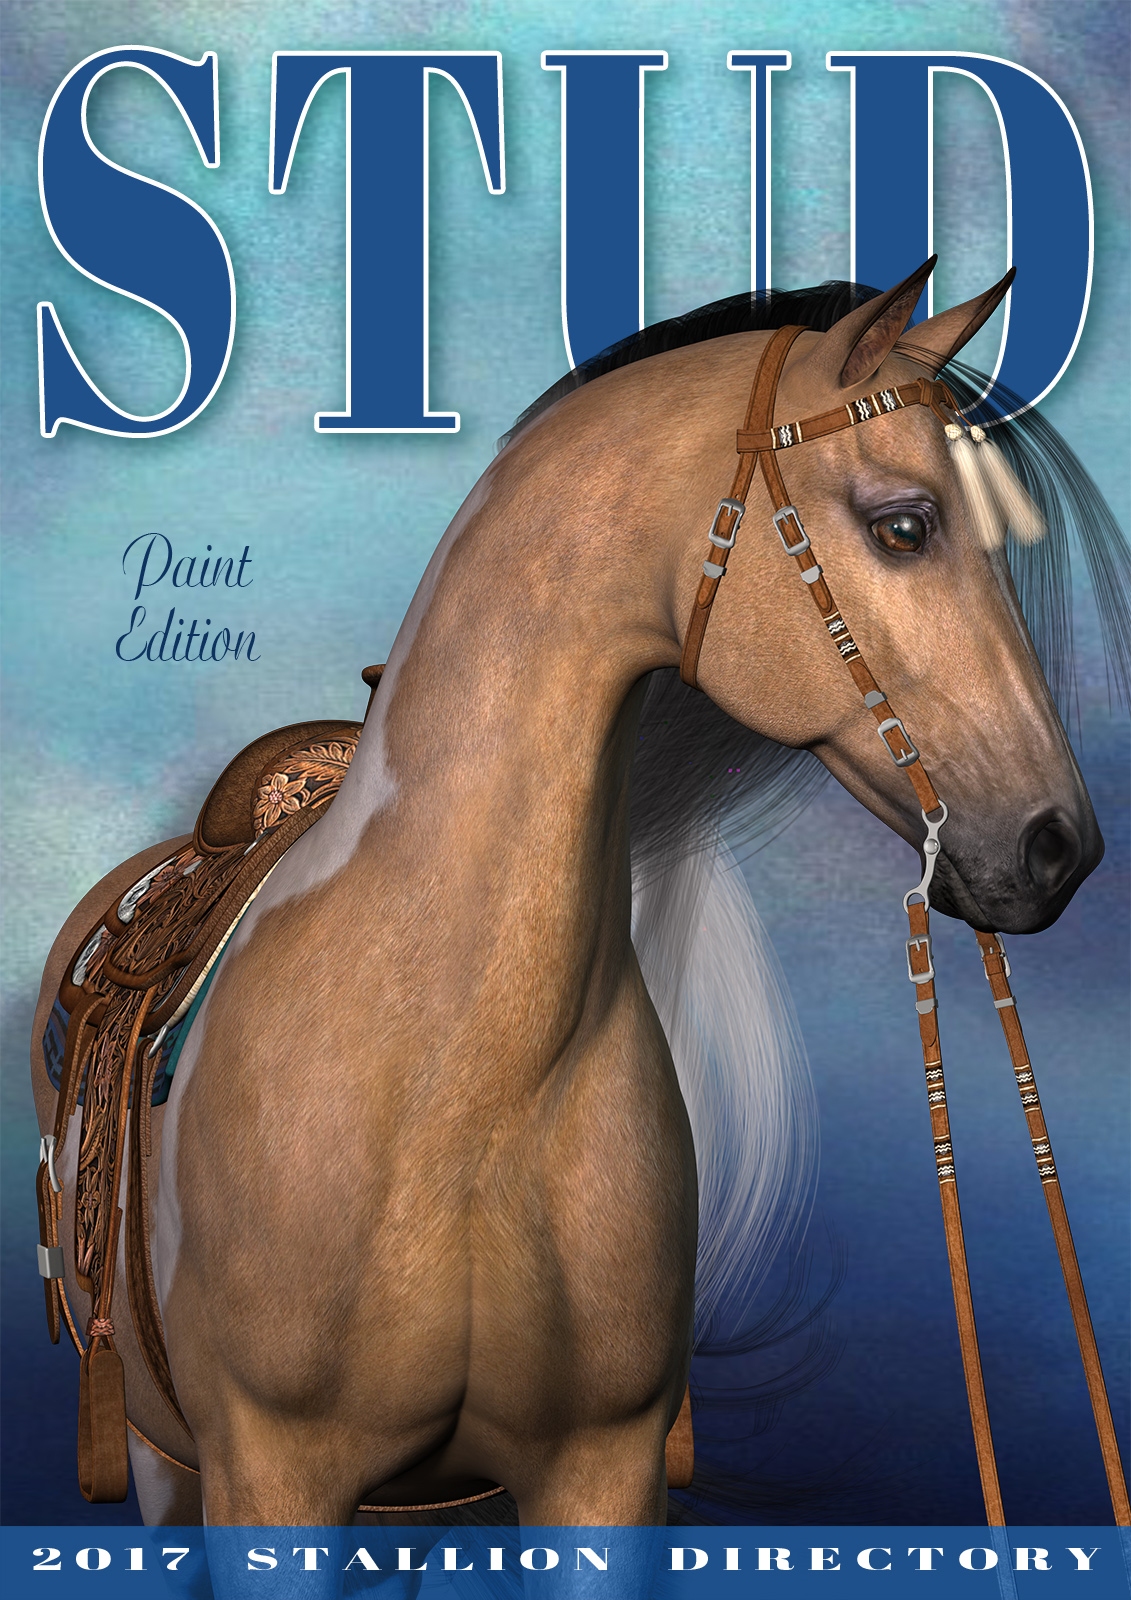 Magazine Cover - Stallion Directory - Paint Edition